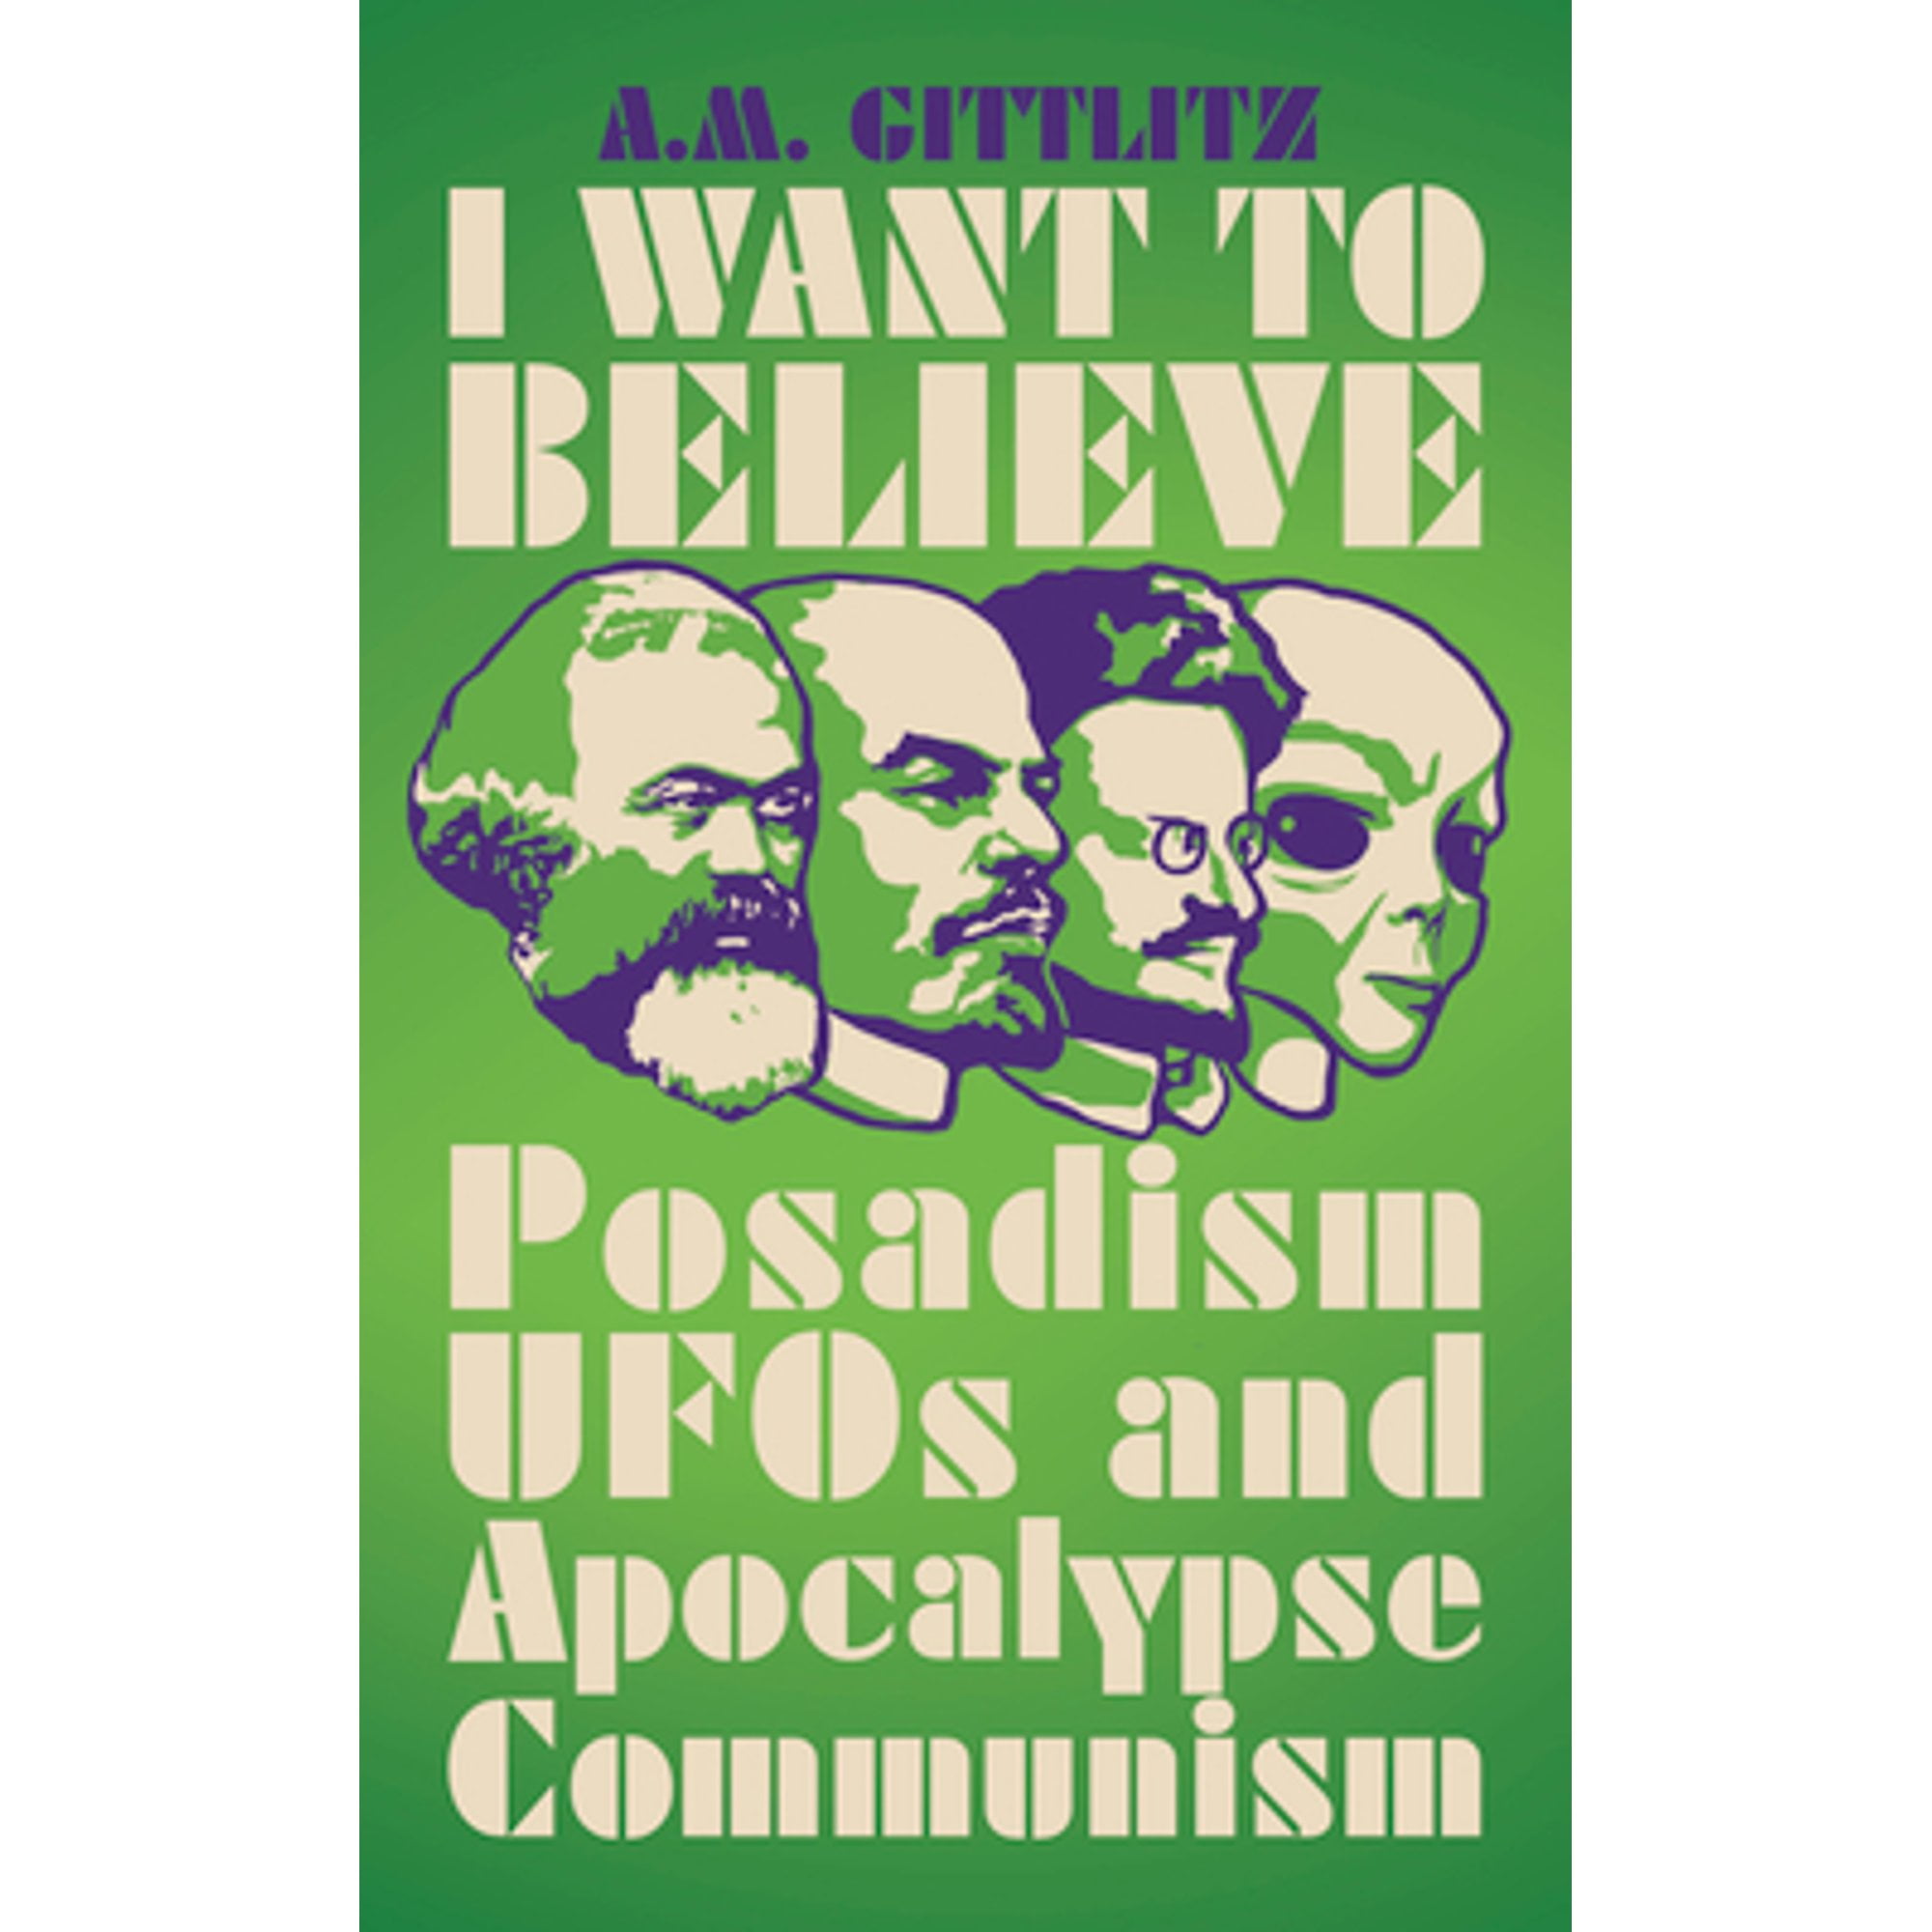 Pre-Owned I Want to Believe: Posadism, UFOs and Apocalypse Communism (Paperback 9780745340777) by A M Gittlitz